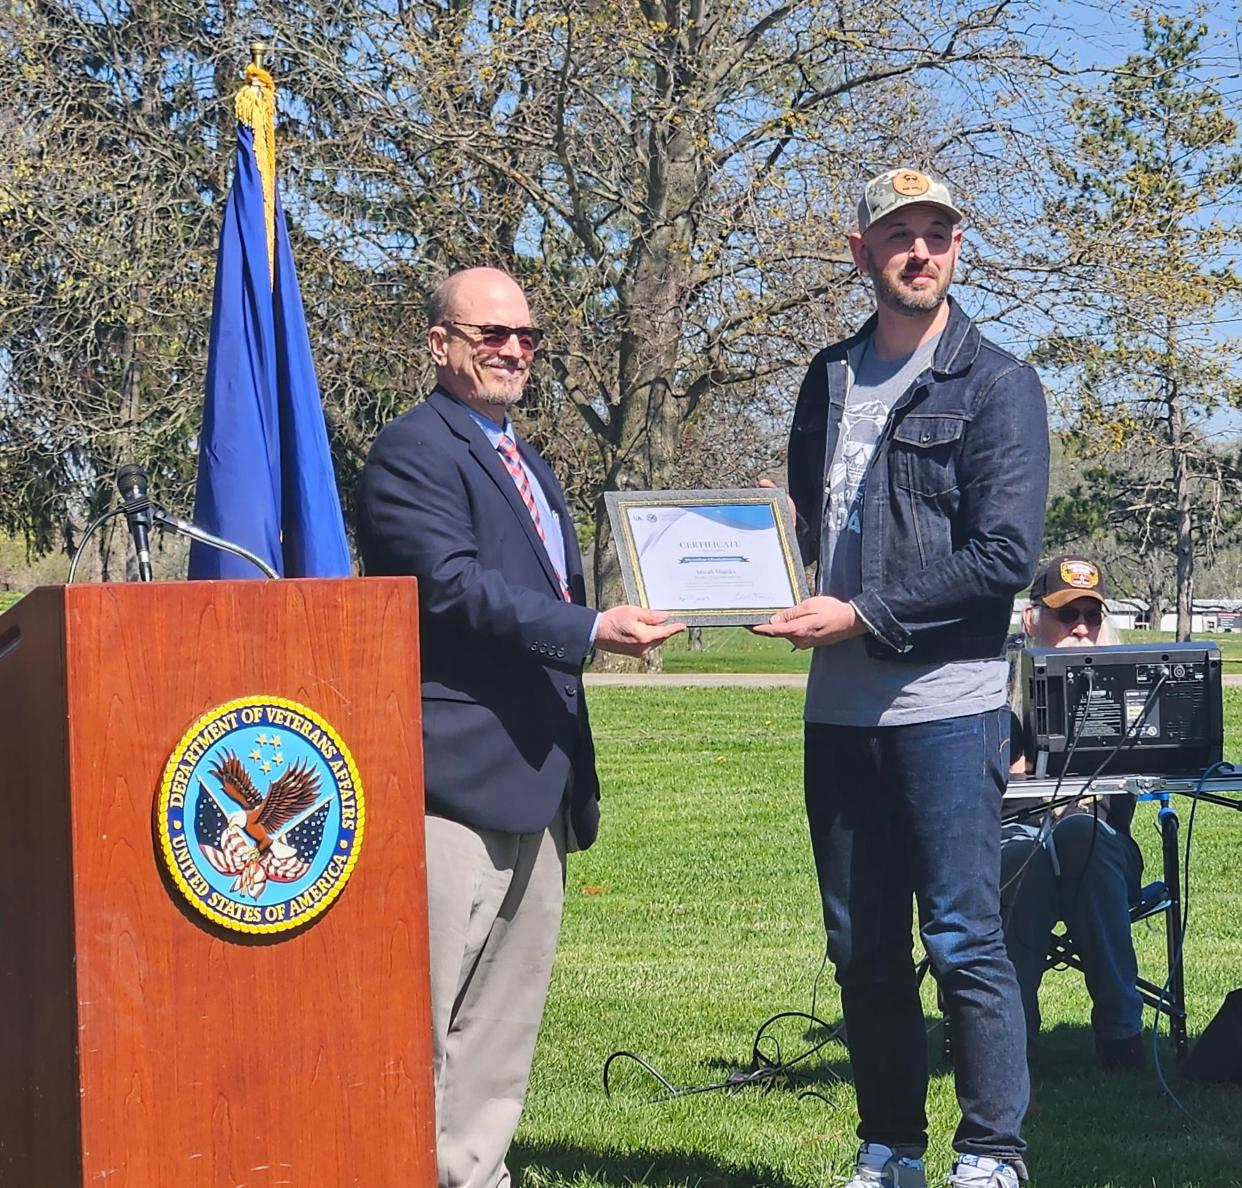 Associate Director Dr. Robert Taylor thanked Micah Shanks, President of Project Bad Apple, a community partner in this project for his hard work during the official opening of the disc gold course.